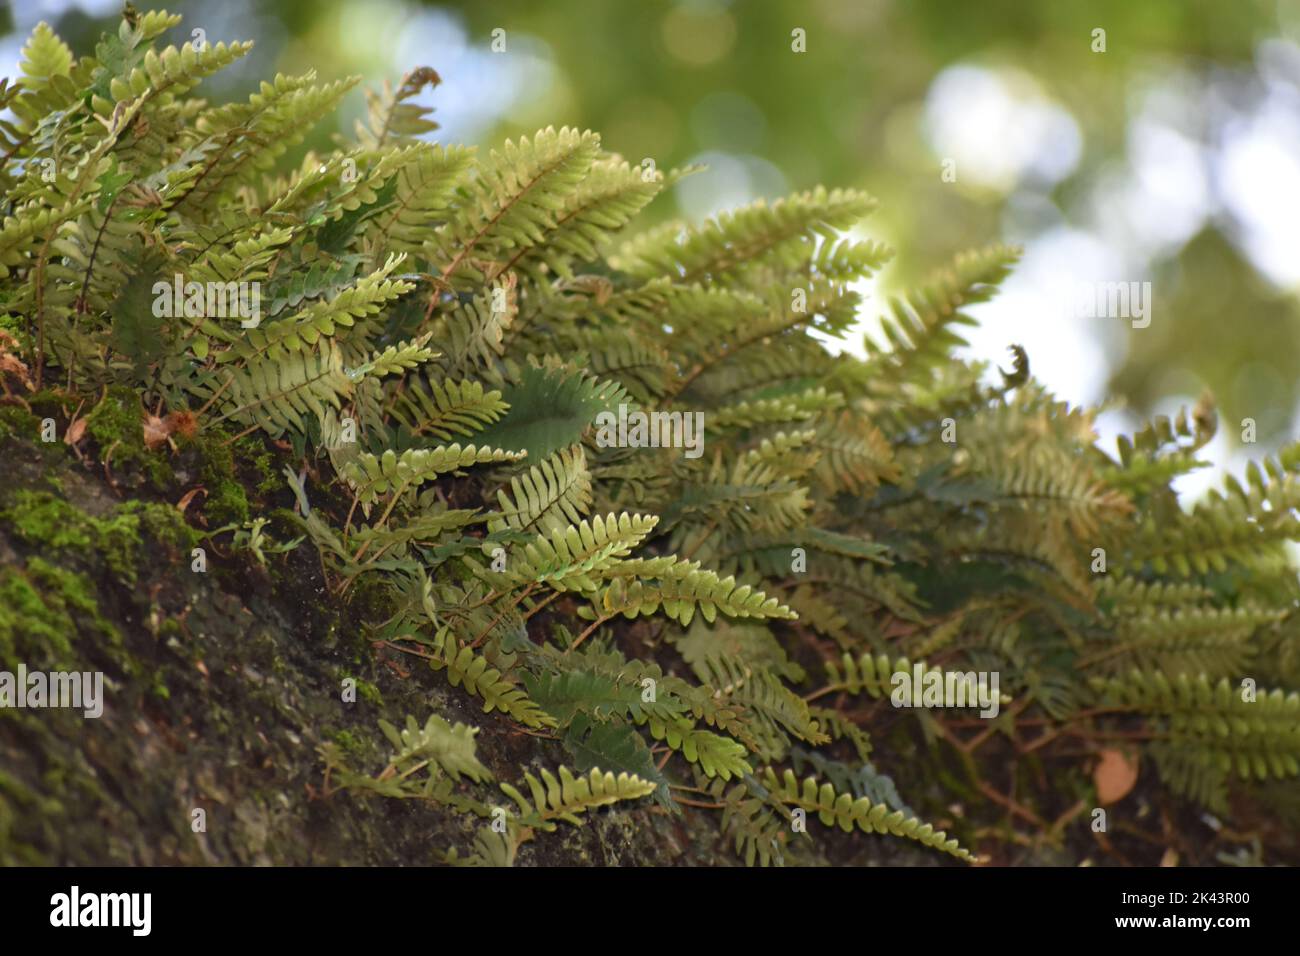 Polypodium sp. ferns on a tree in St. Augustine, Trinidad Stock Photo